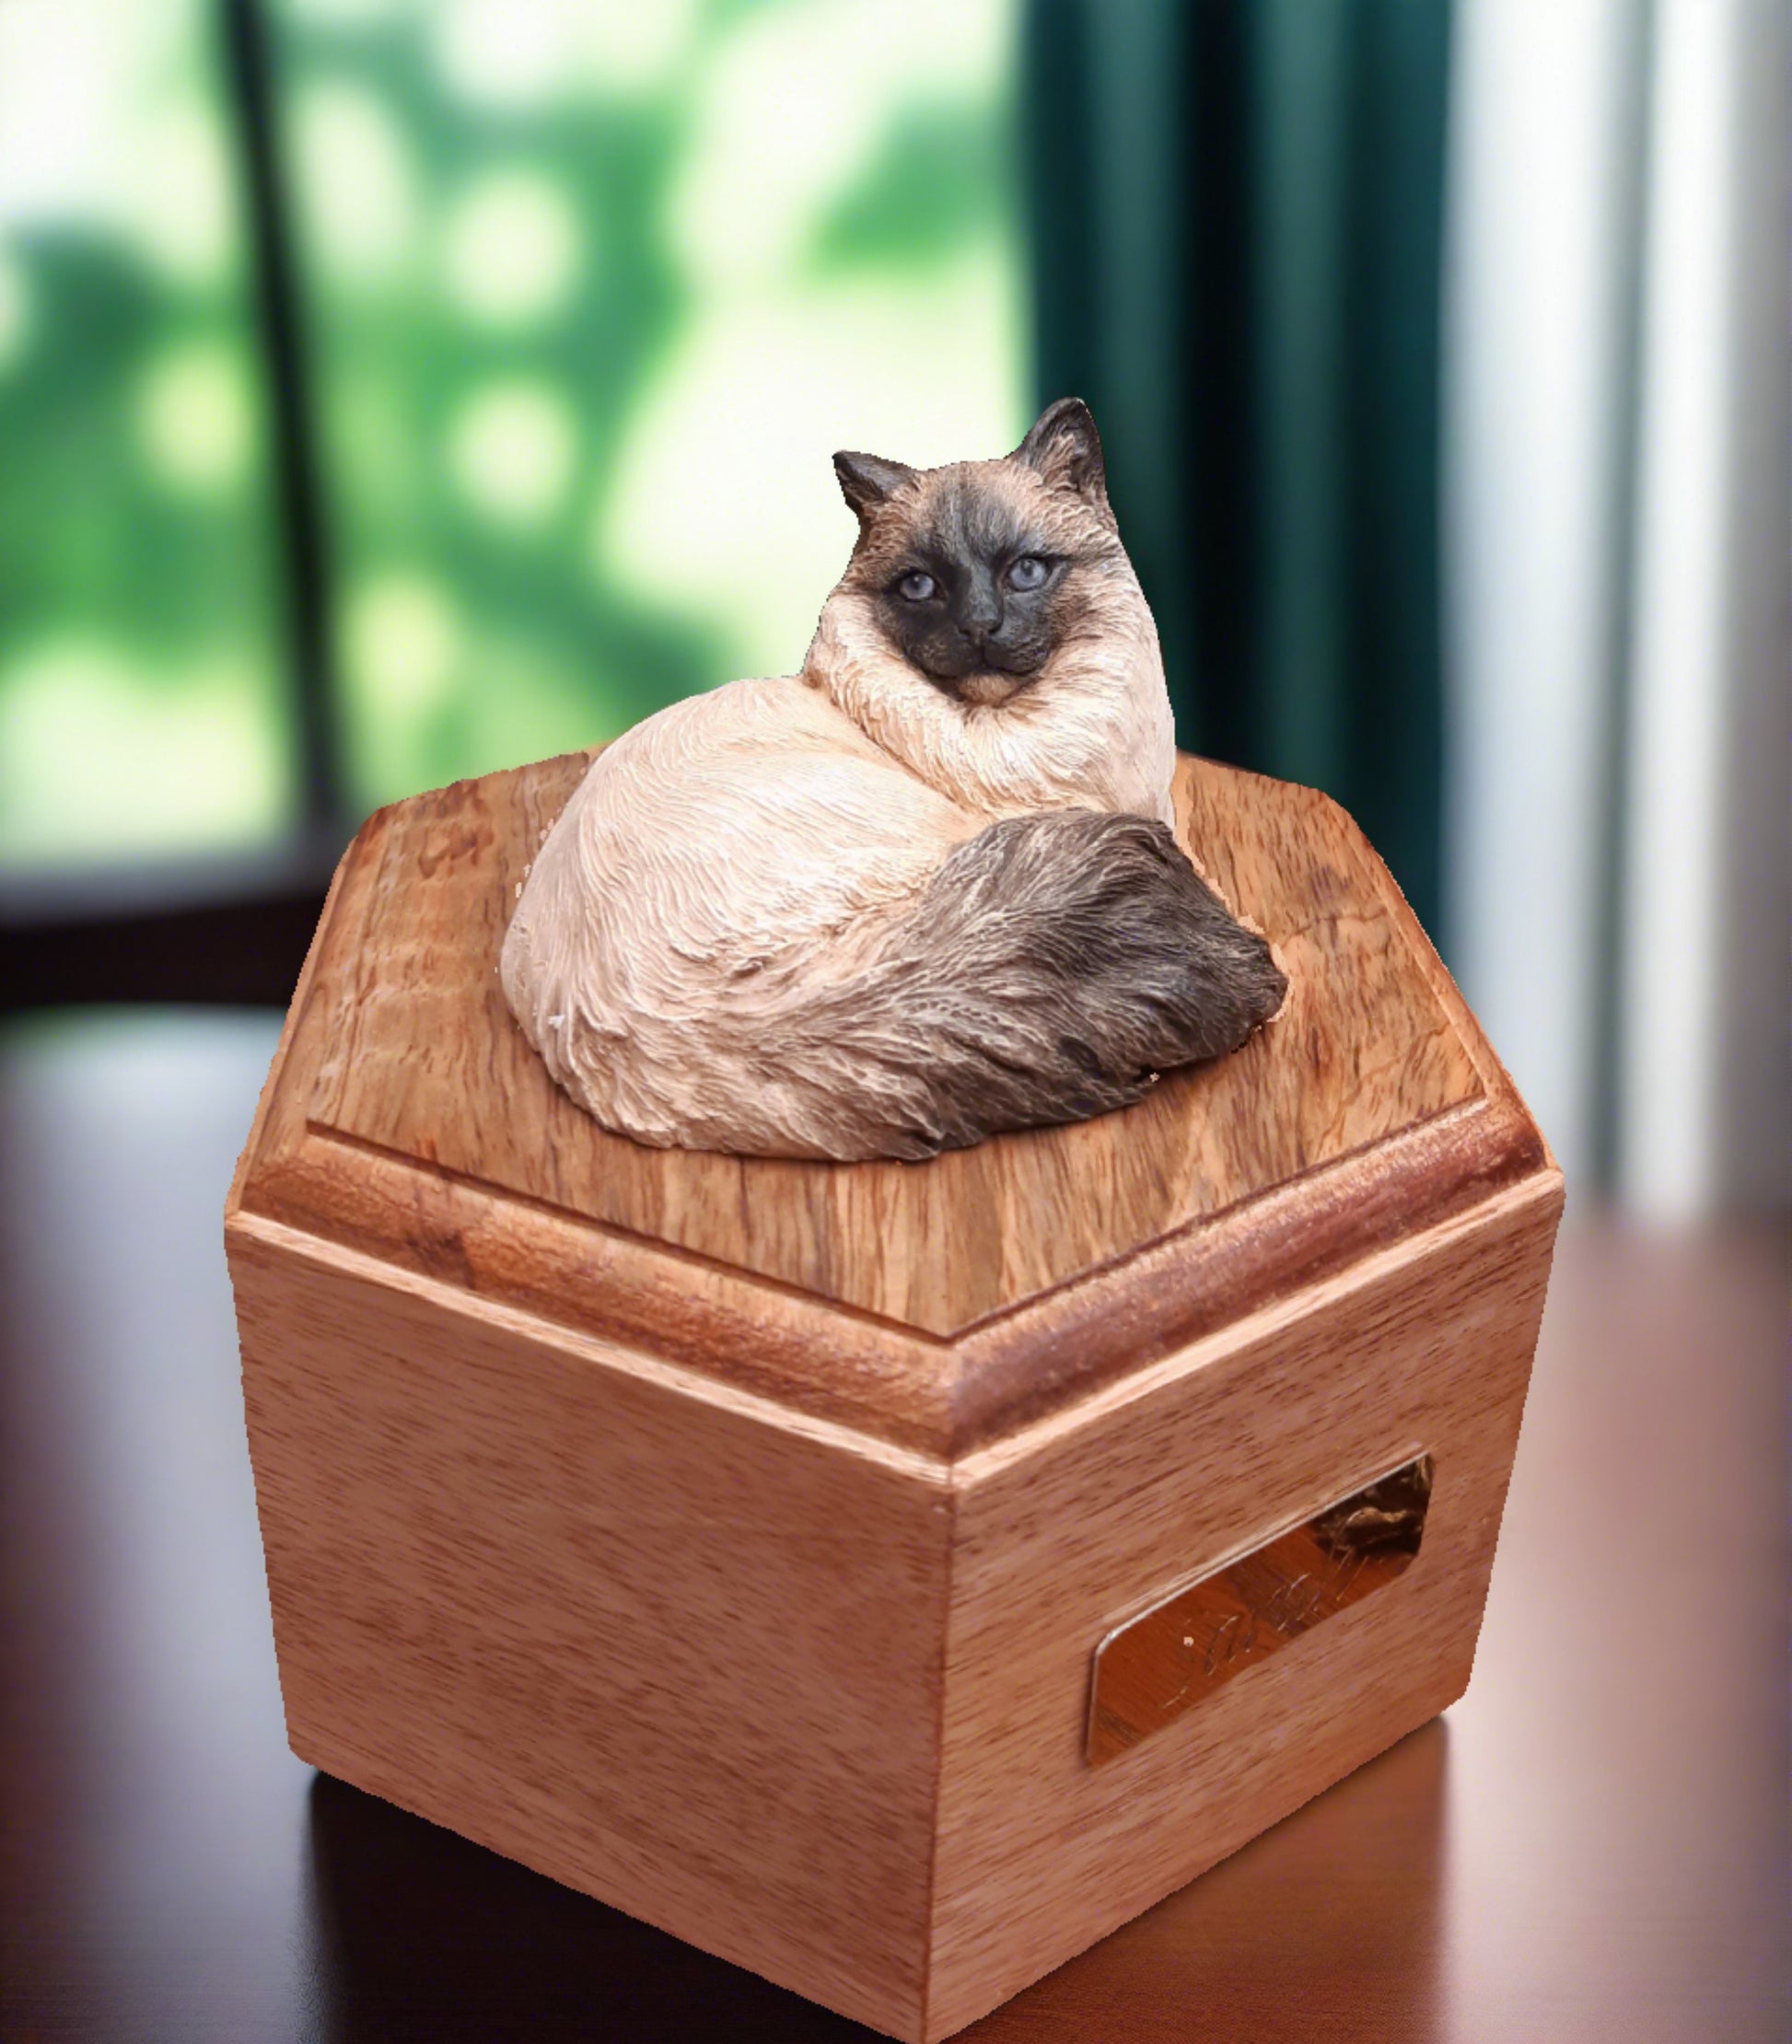 Seal point ragdoll cat lying on a wooden cremation urn